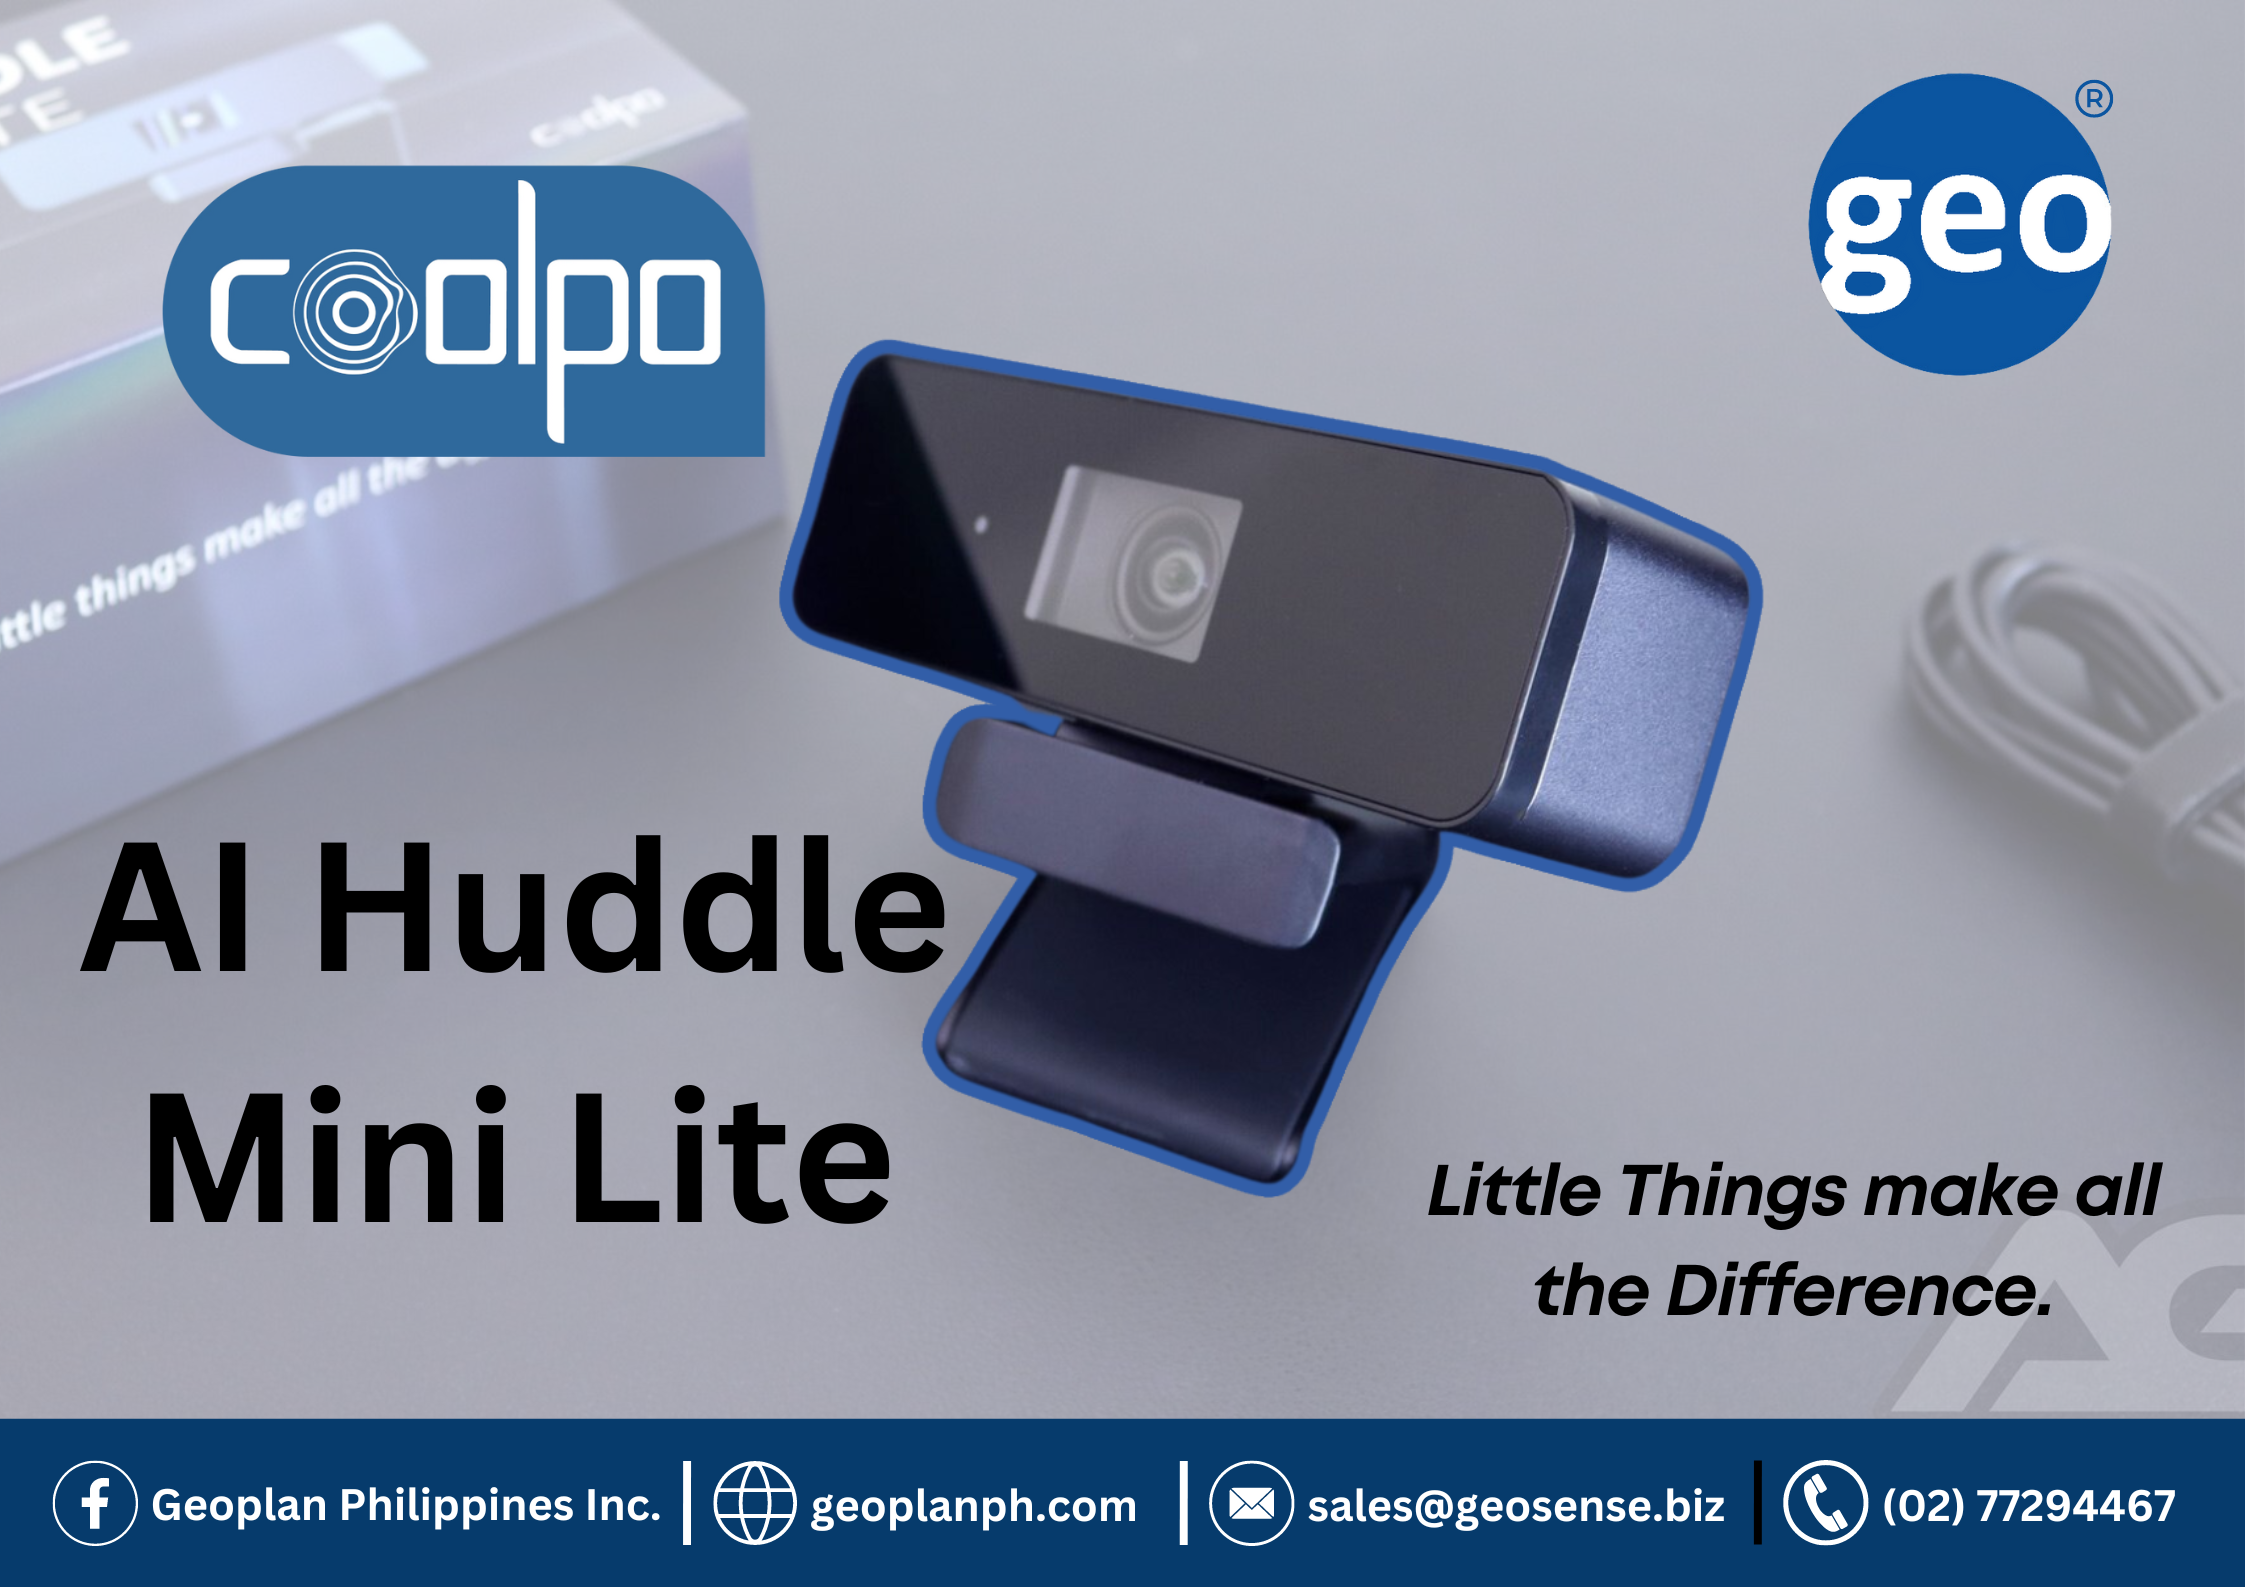 Coolpo: The New AI Huddle Mini Lite. A Revolutionary Smart Conference Camera For Remote Meetings